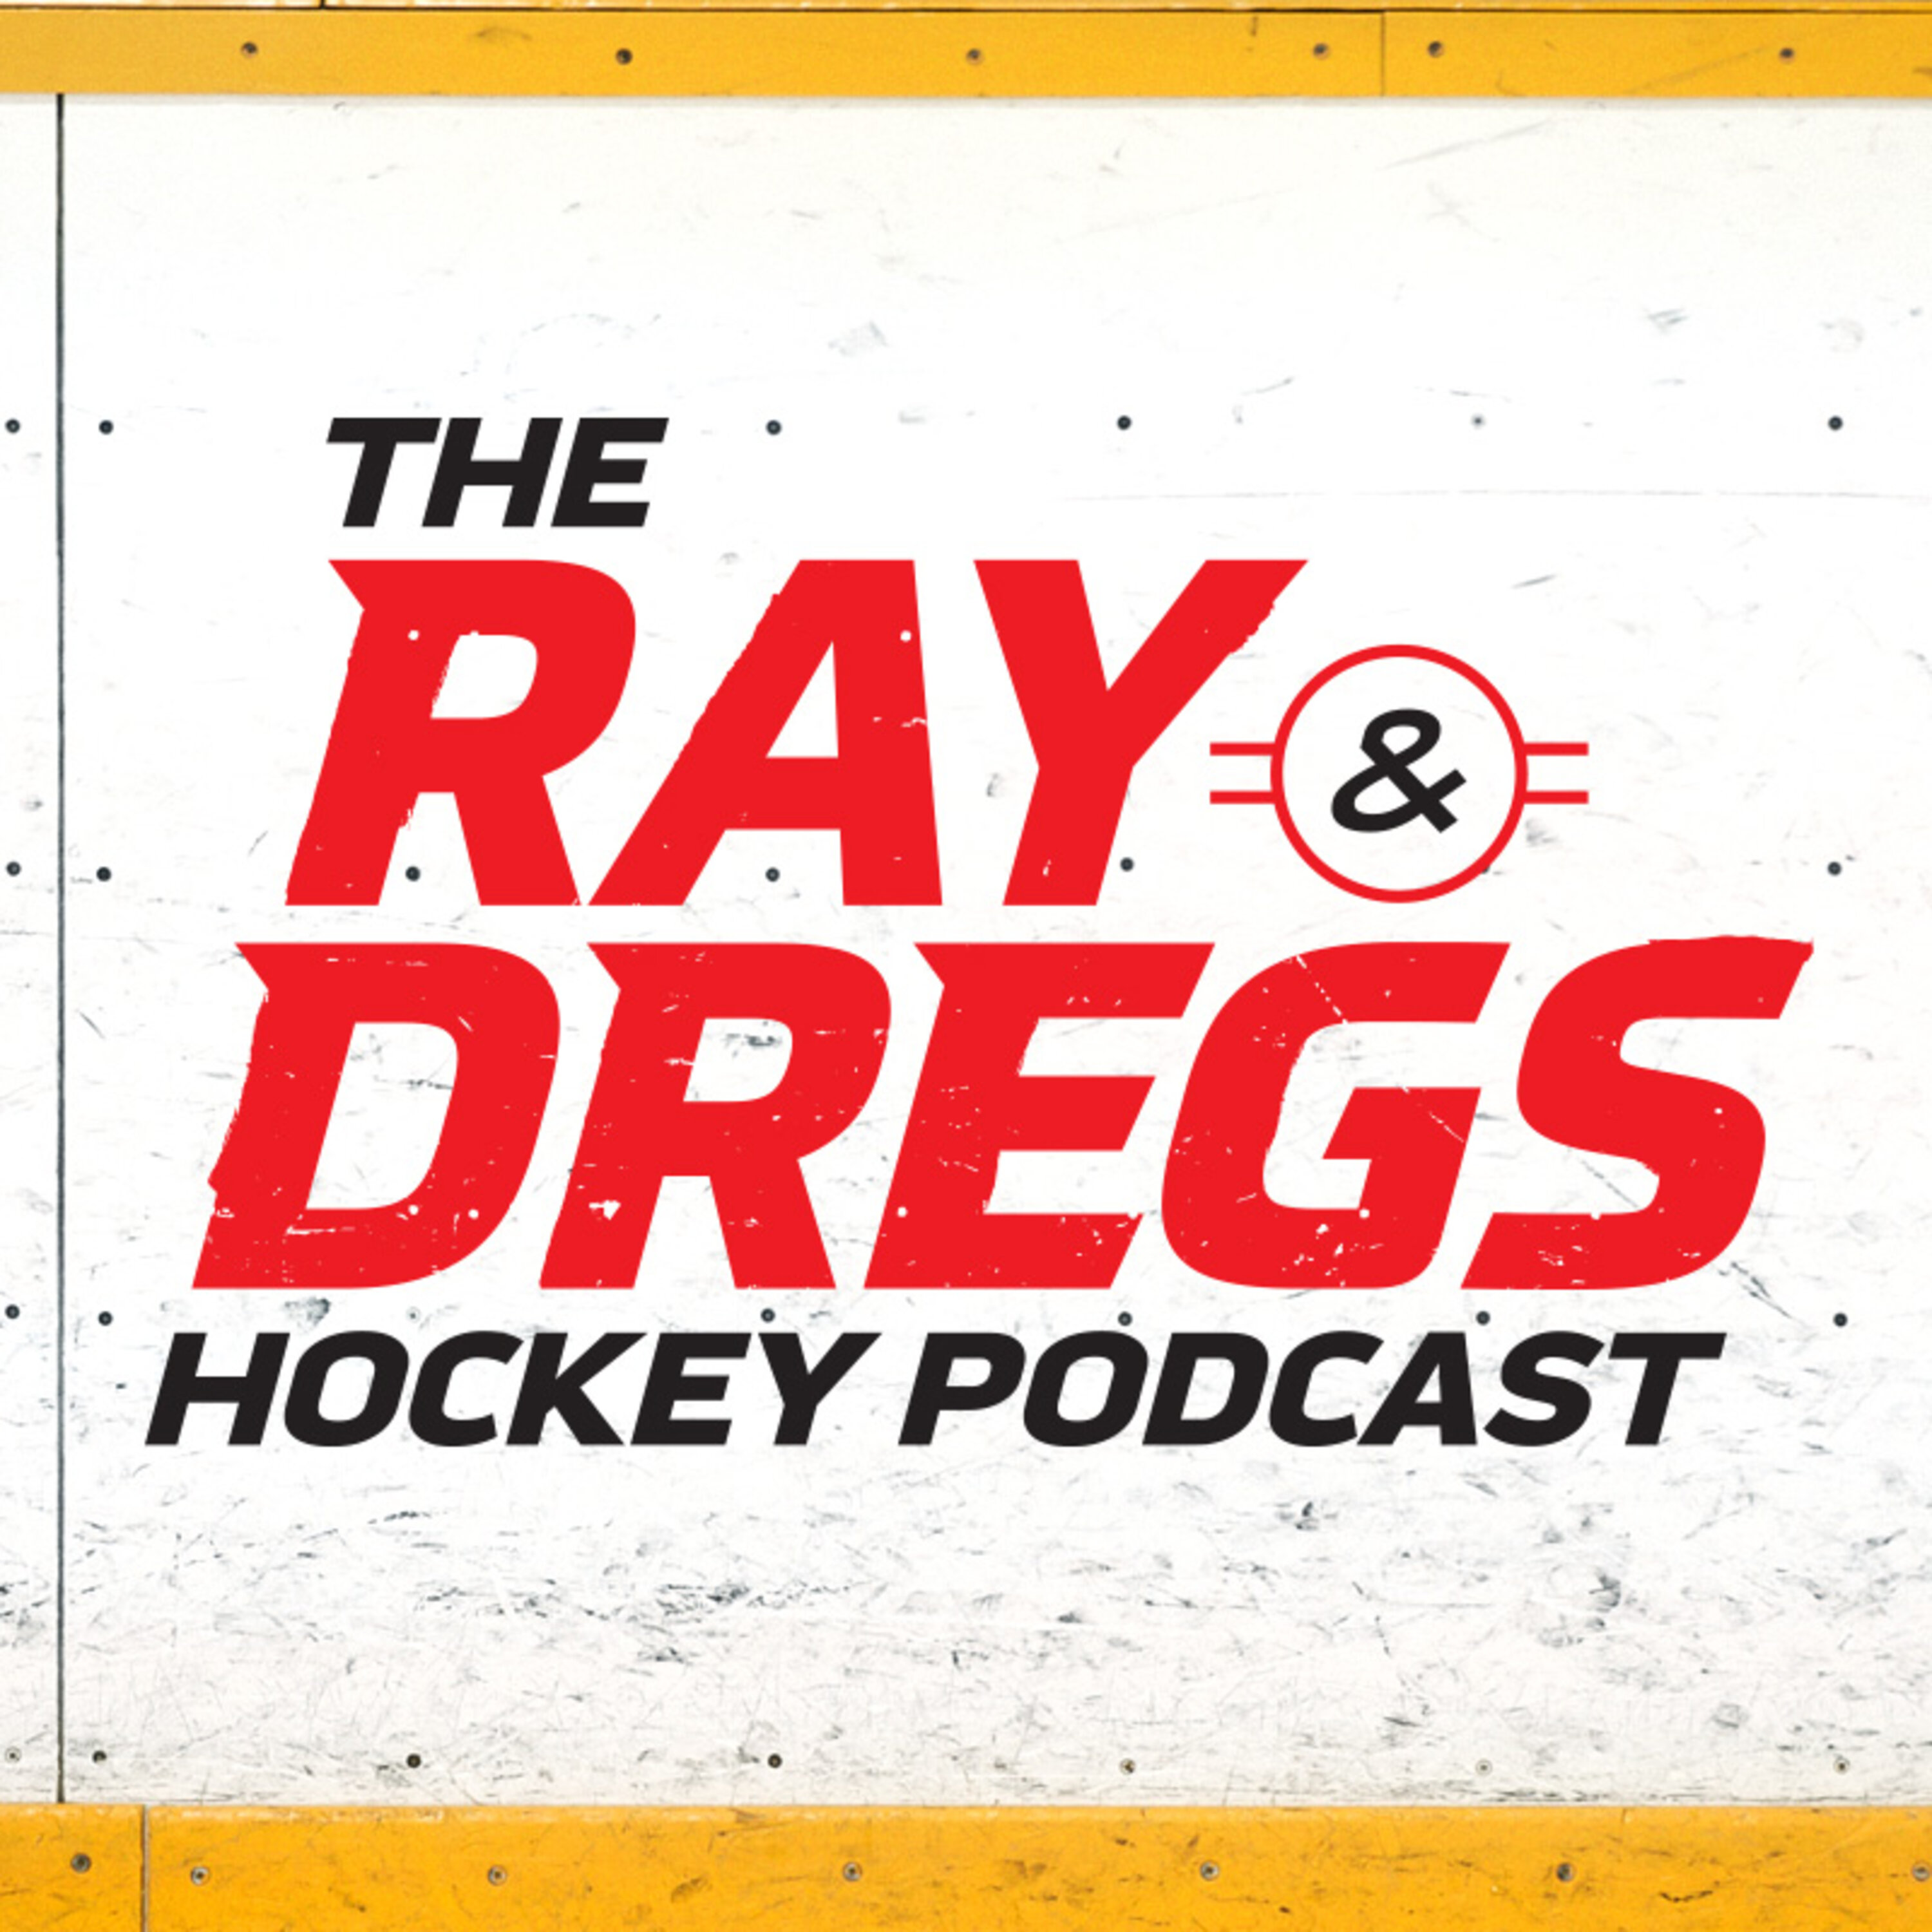 A highlight from Hot Streaks & Hot Seats w/ Former NHL GM Dave Nonis